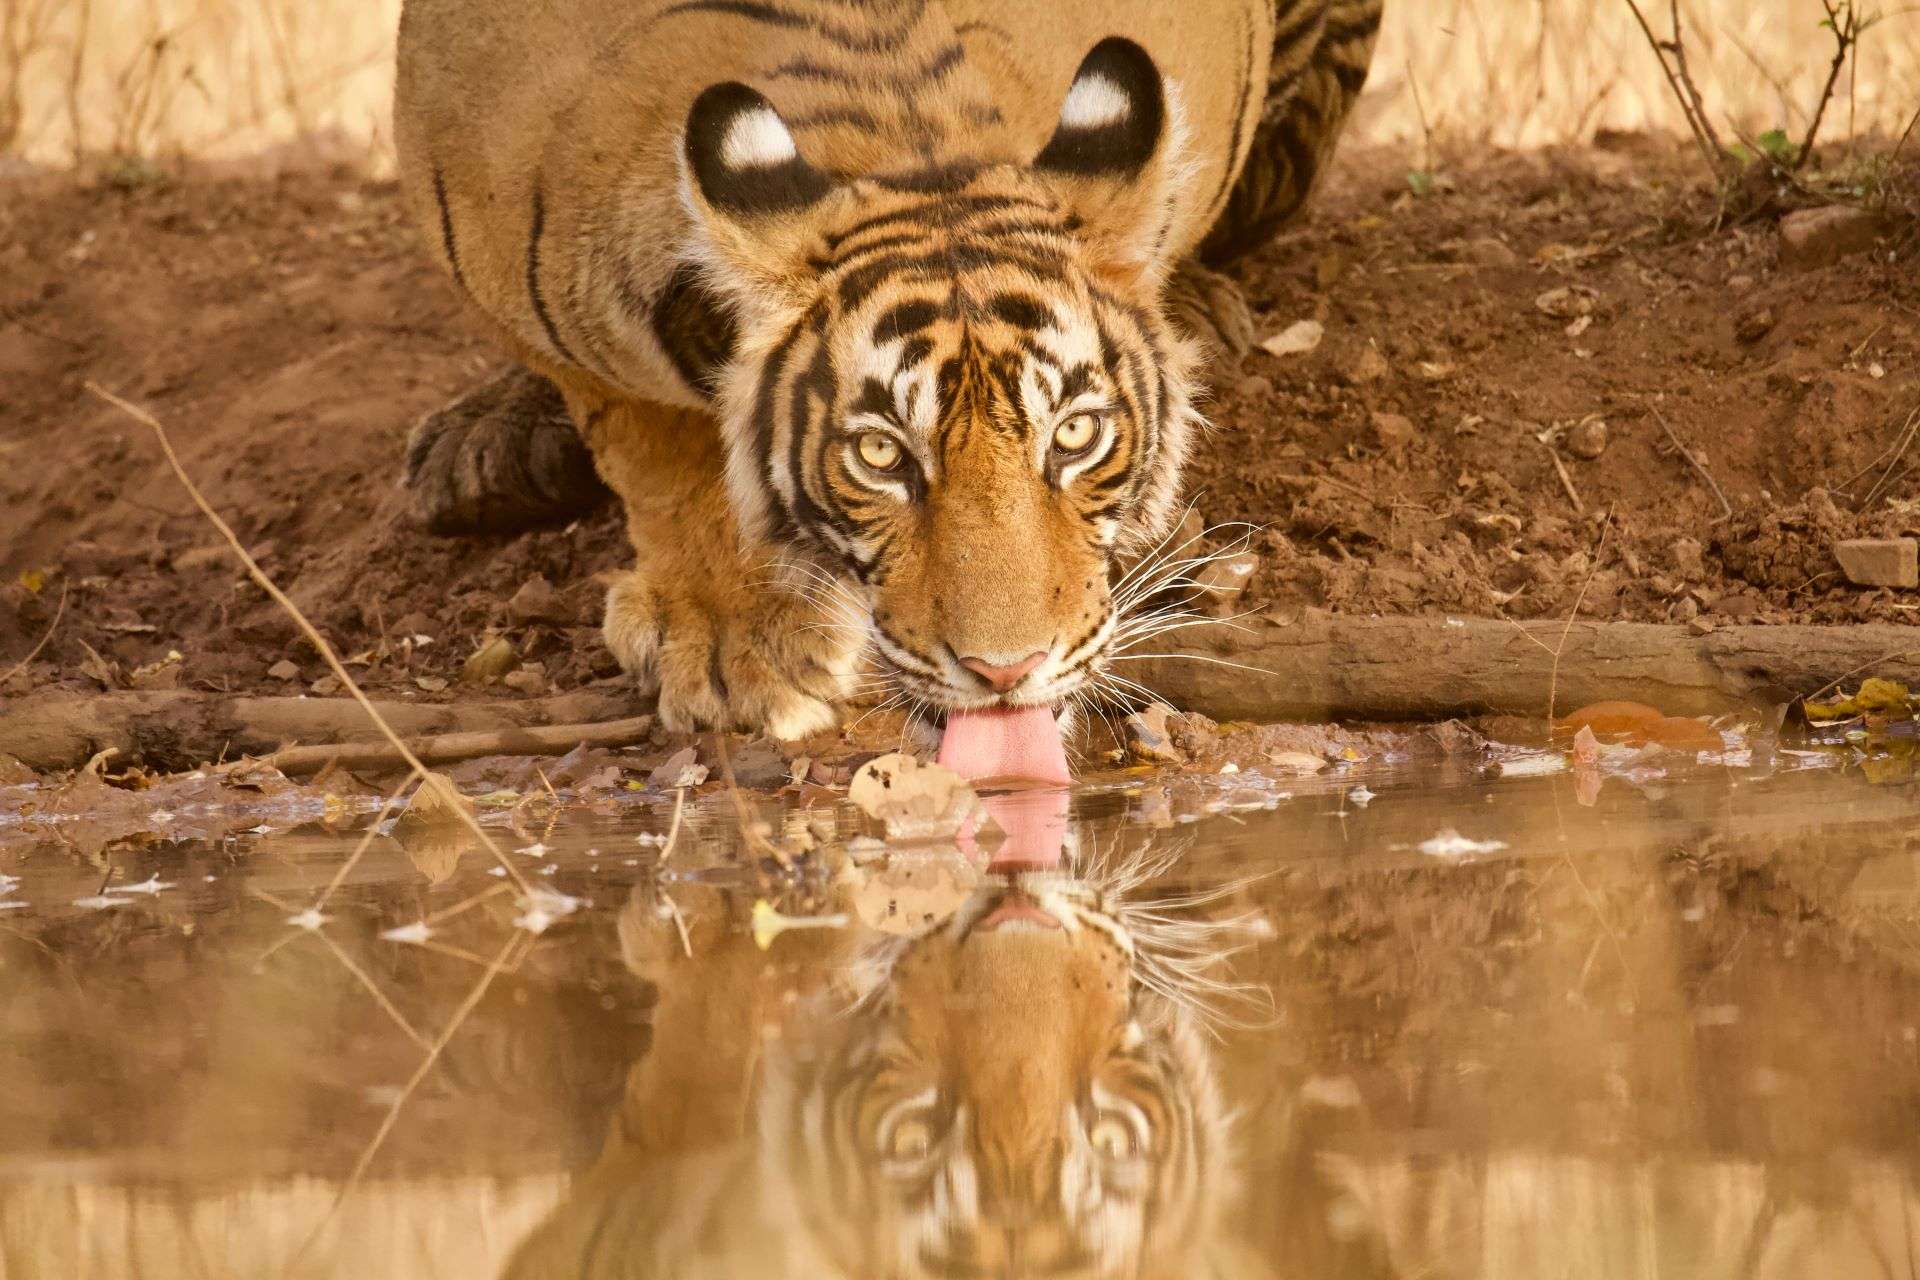 Bengal Tiger drinking water in India by Conan Dumenil